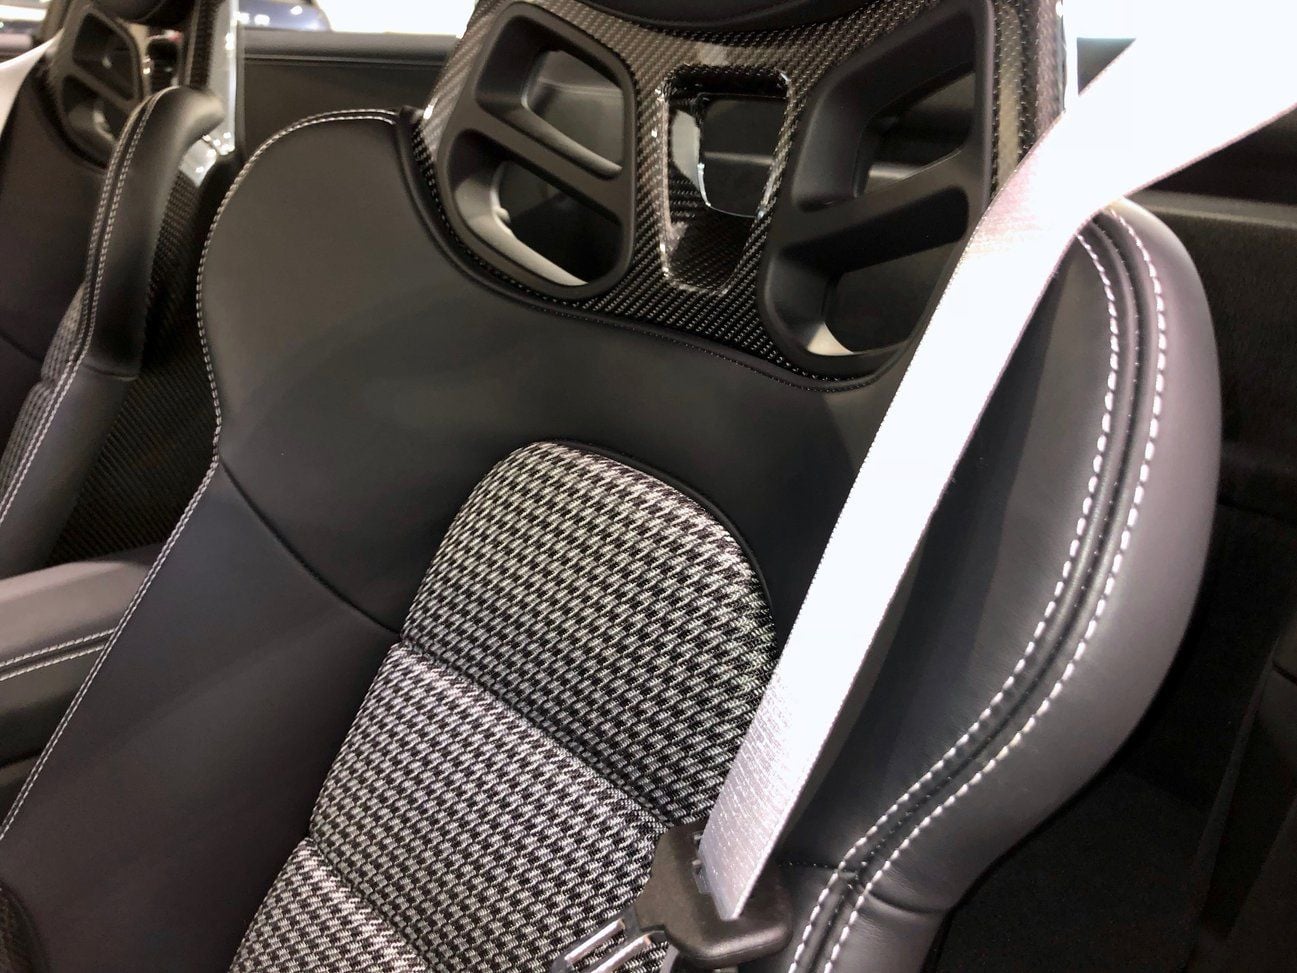 Interior/Upholstery - Houndstooth/Pepita Inserts (911R style) for LWB Seats - Used - 2012 to 2021 Porsche 911 - Boston, MA 02115, United States